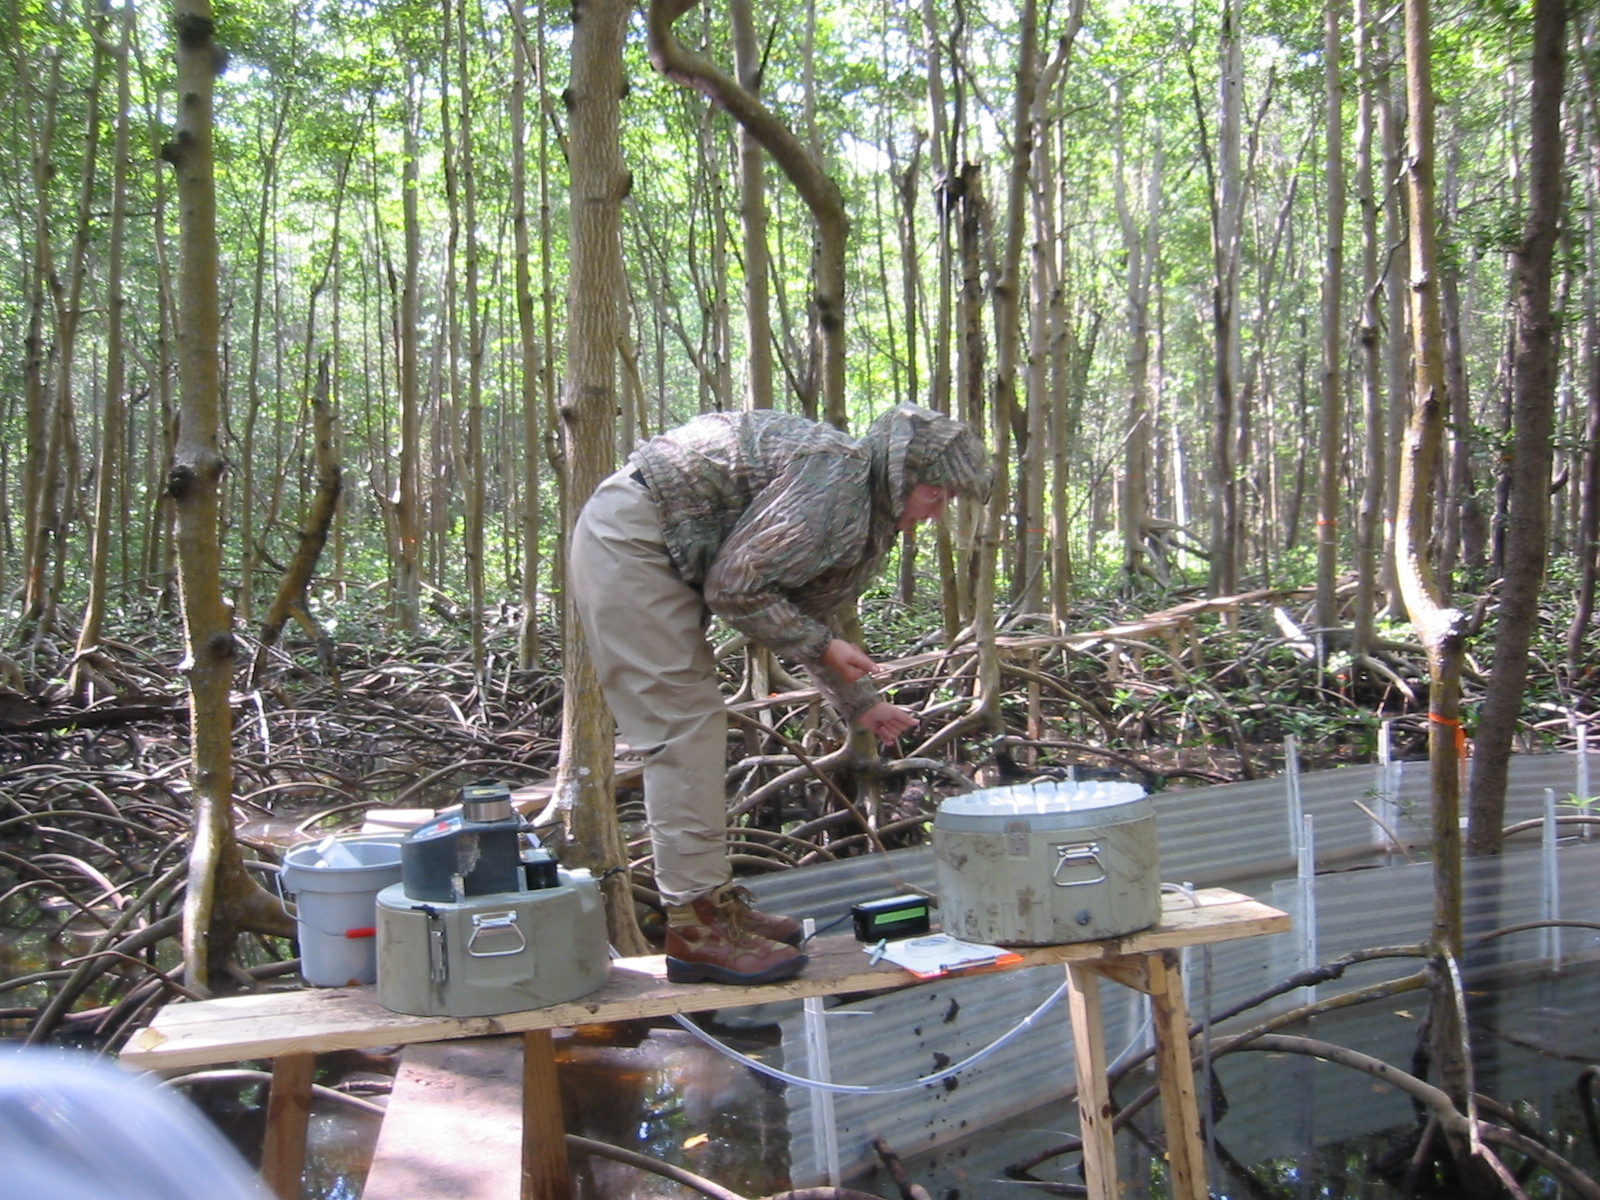 Melissa Romigh setting up autosamplers for a flume study inside a mangrove forest at SRS-6 in Shark River Slough